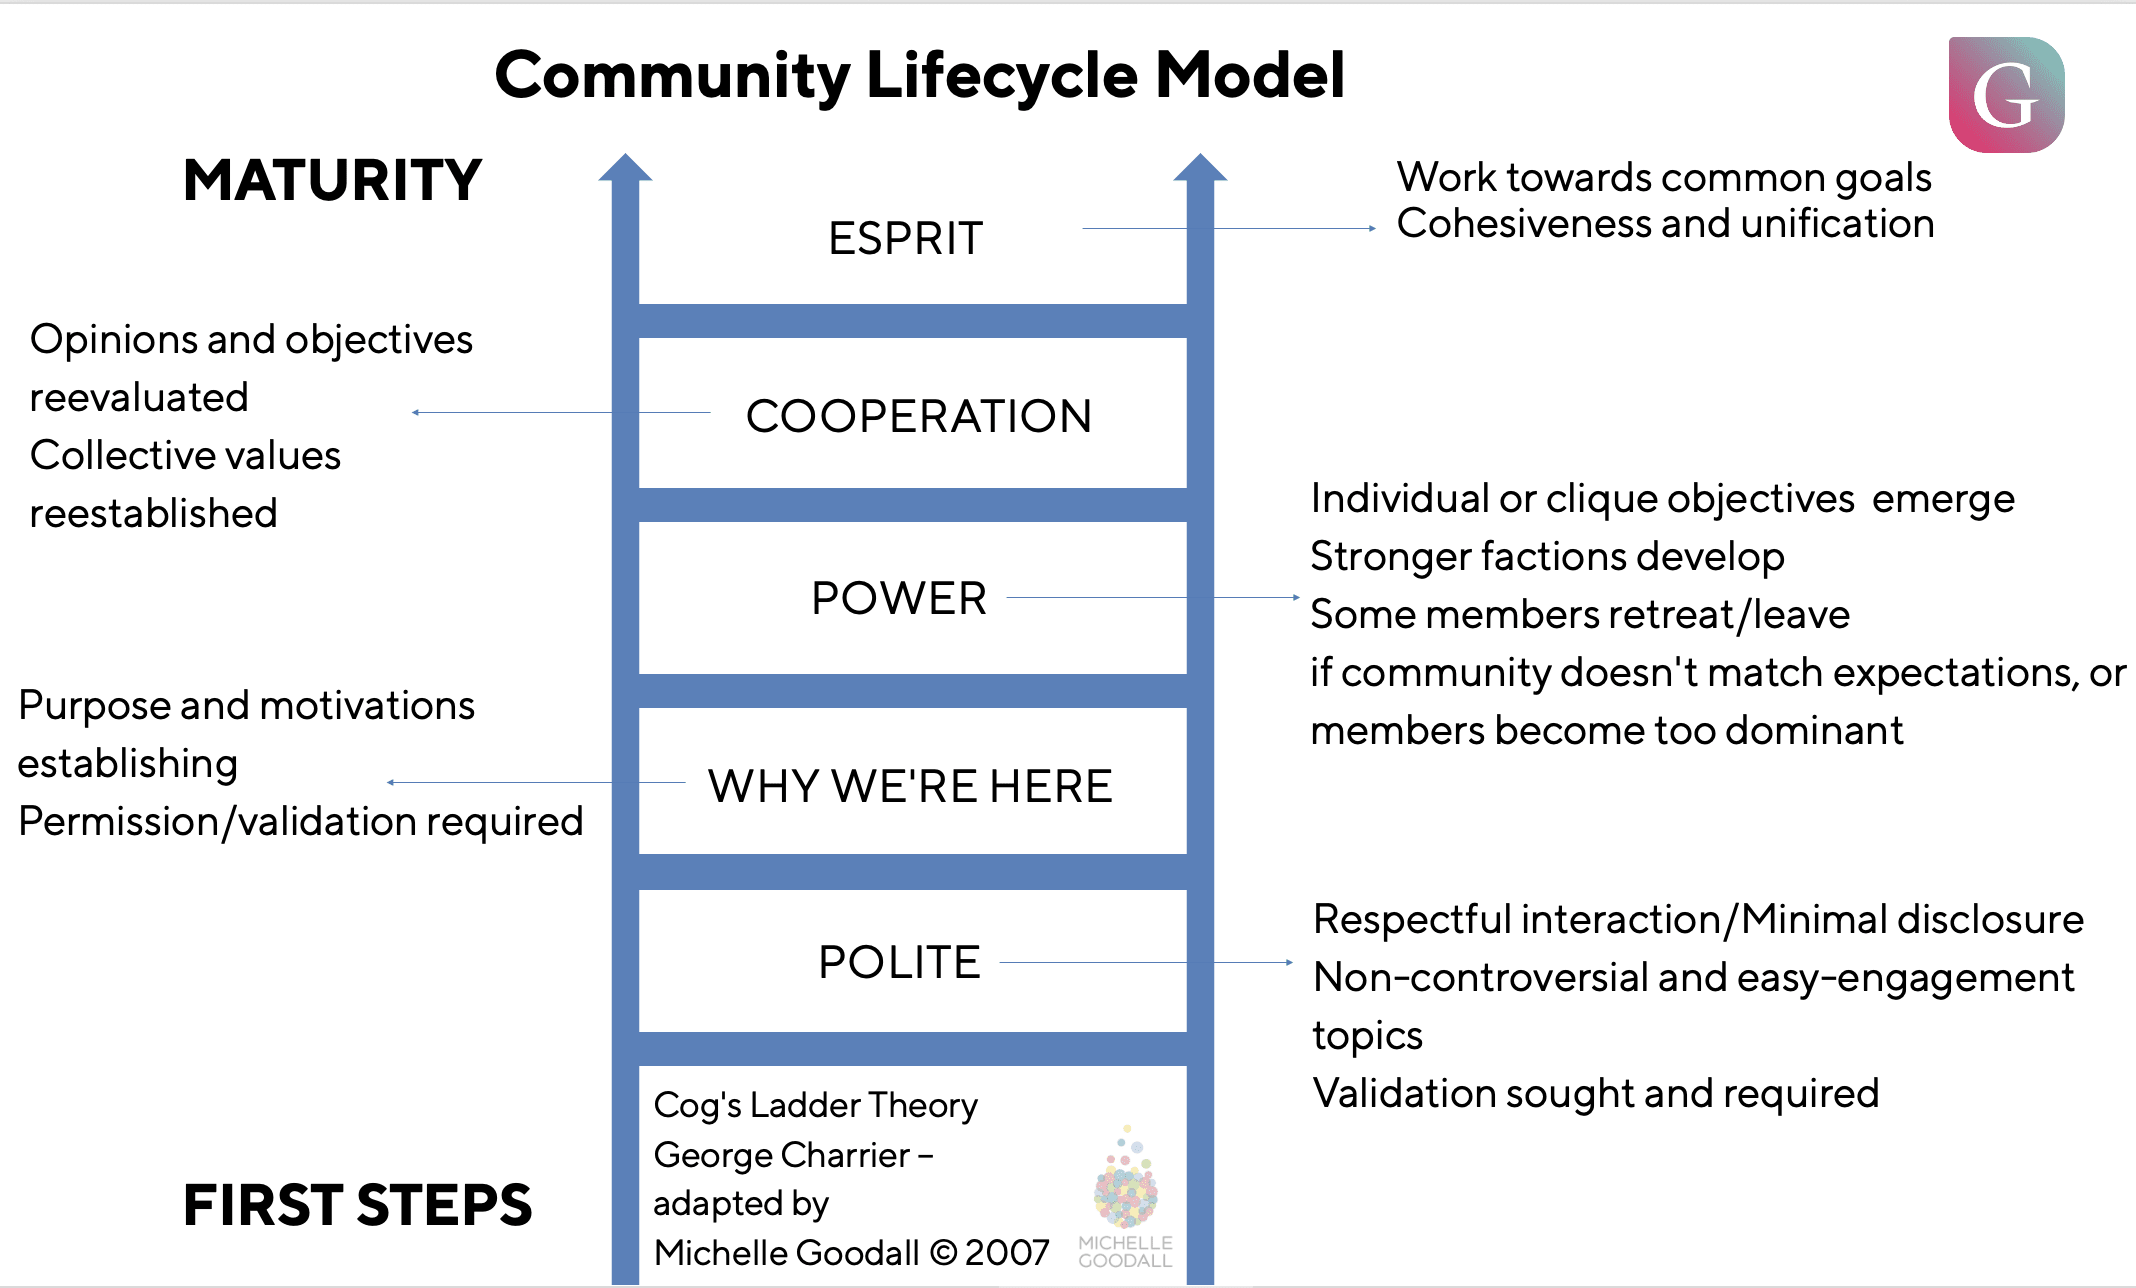 The Community Lifecycle Model - Michelle Goodall 2007